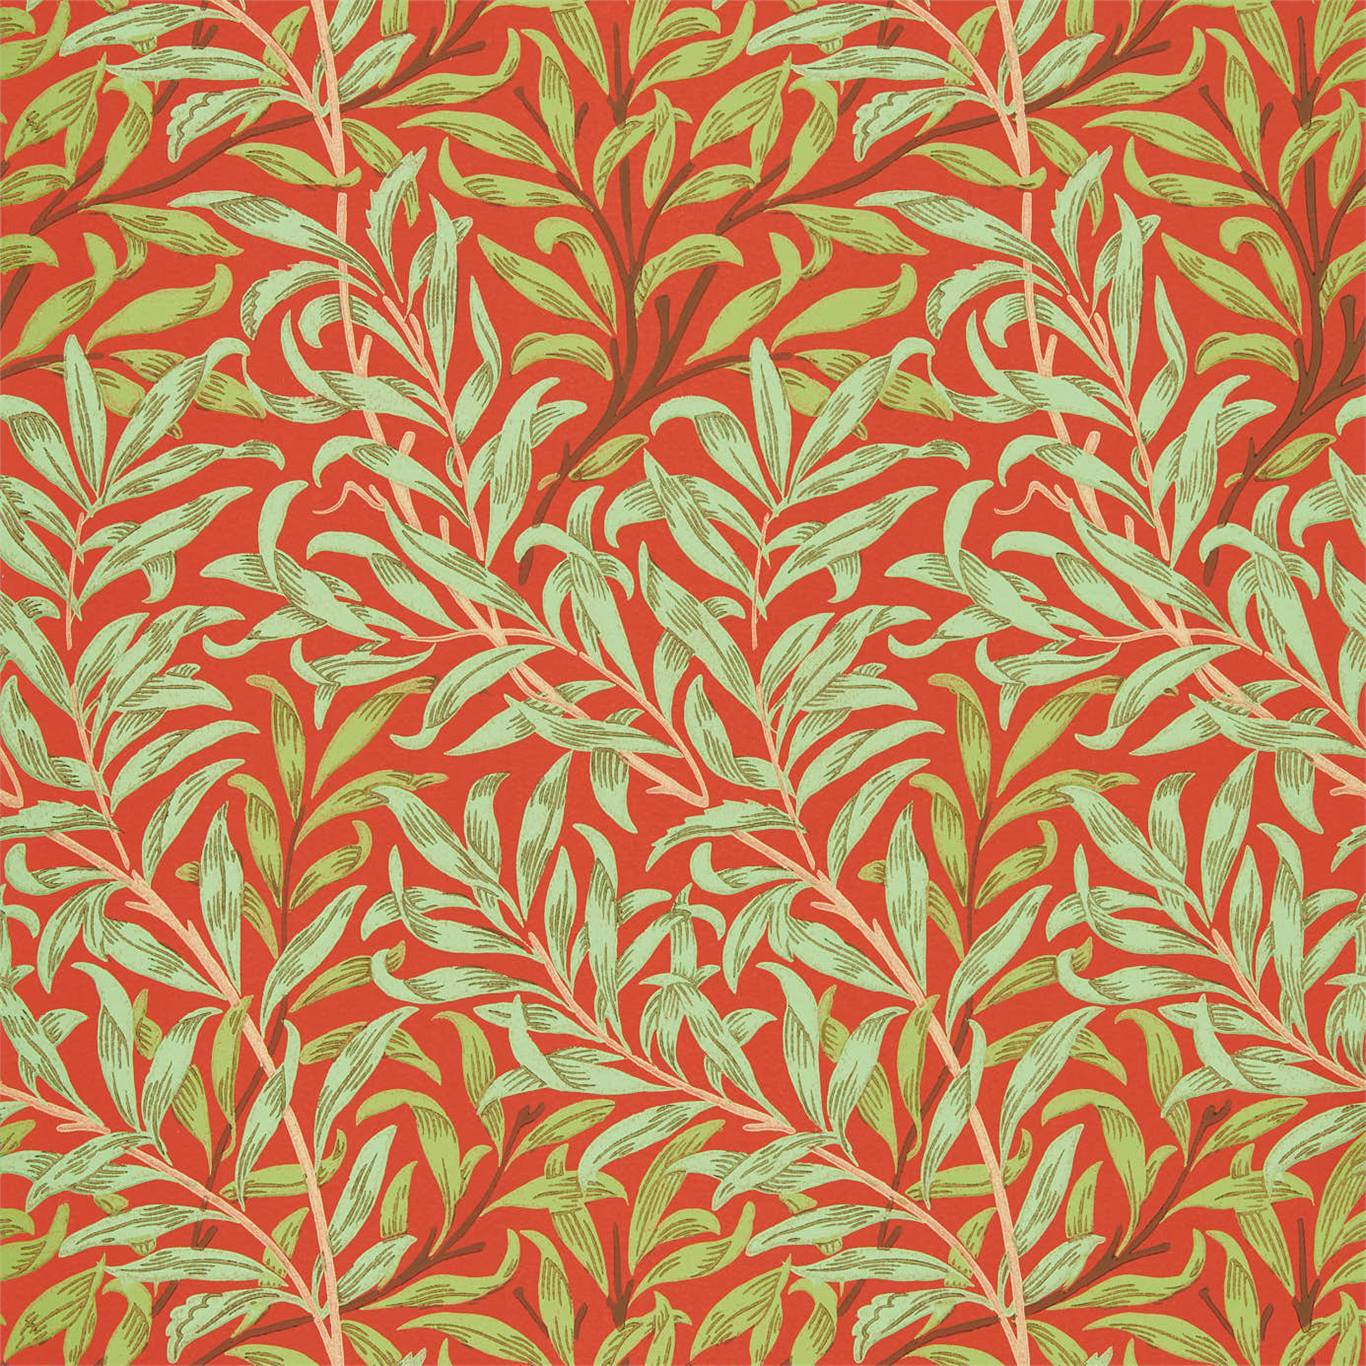 William Morris Willow Bough Wallpaper DBPW216951 by Morris & Co